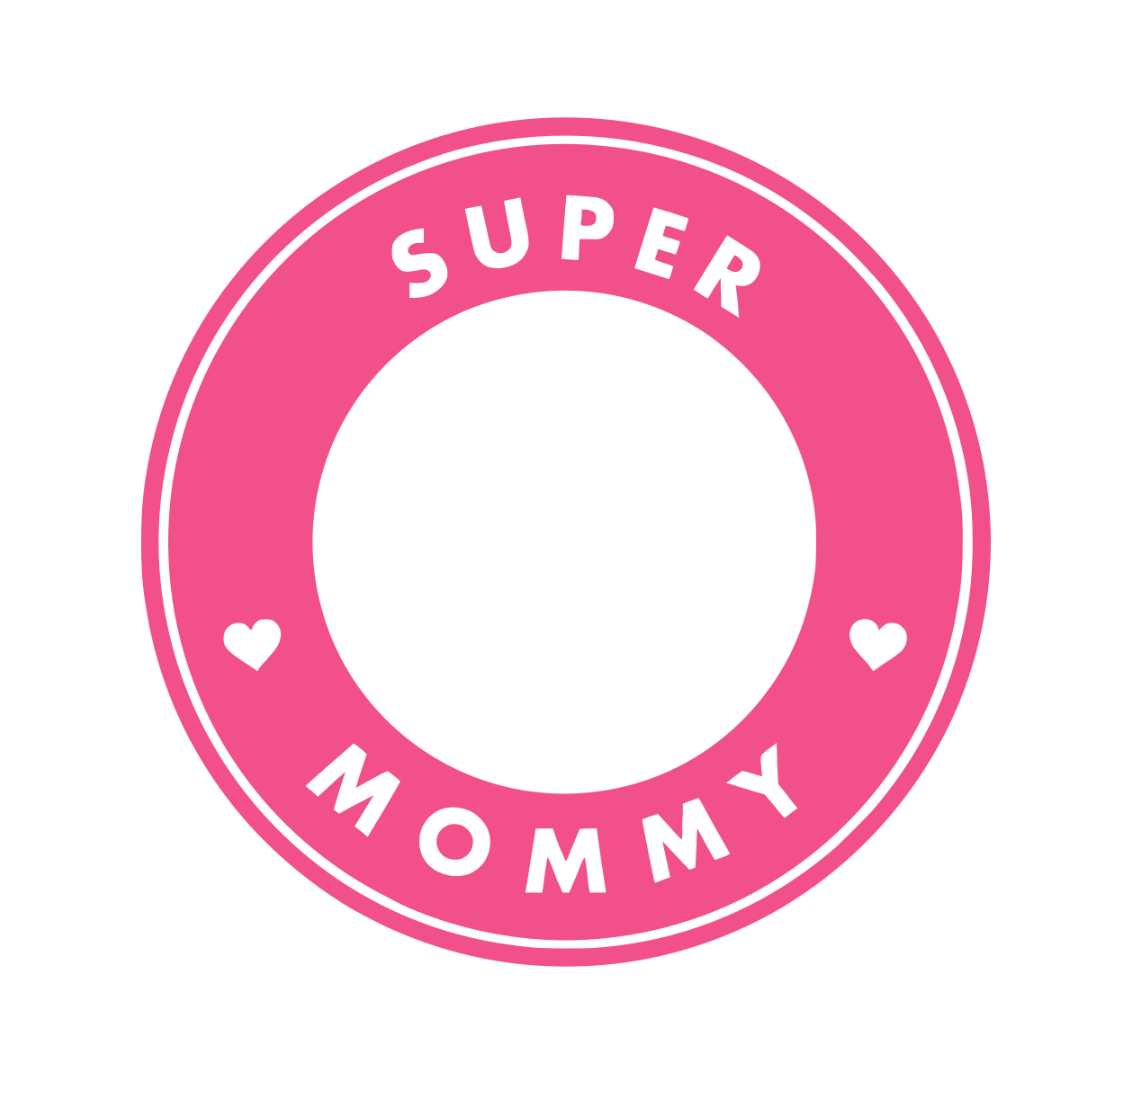 Super Mommy